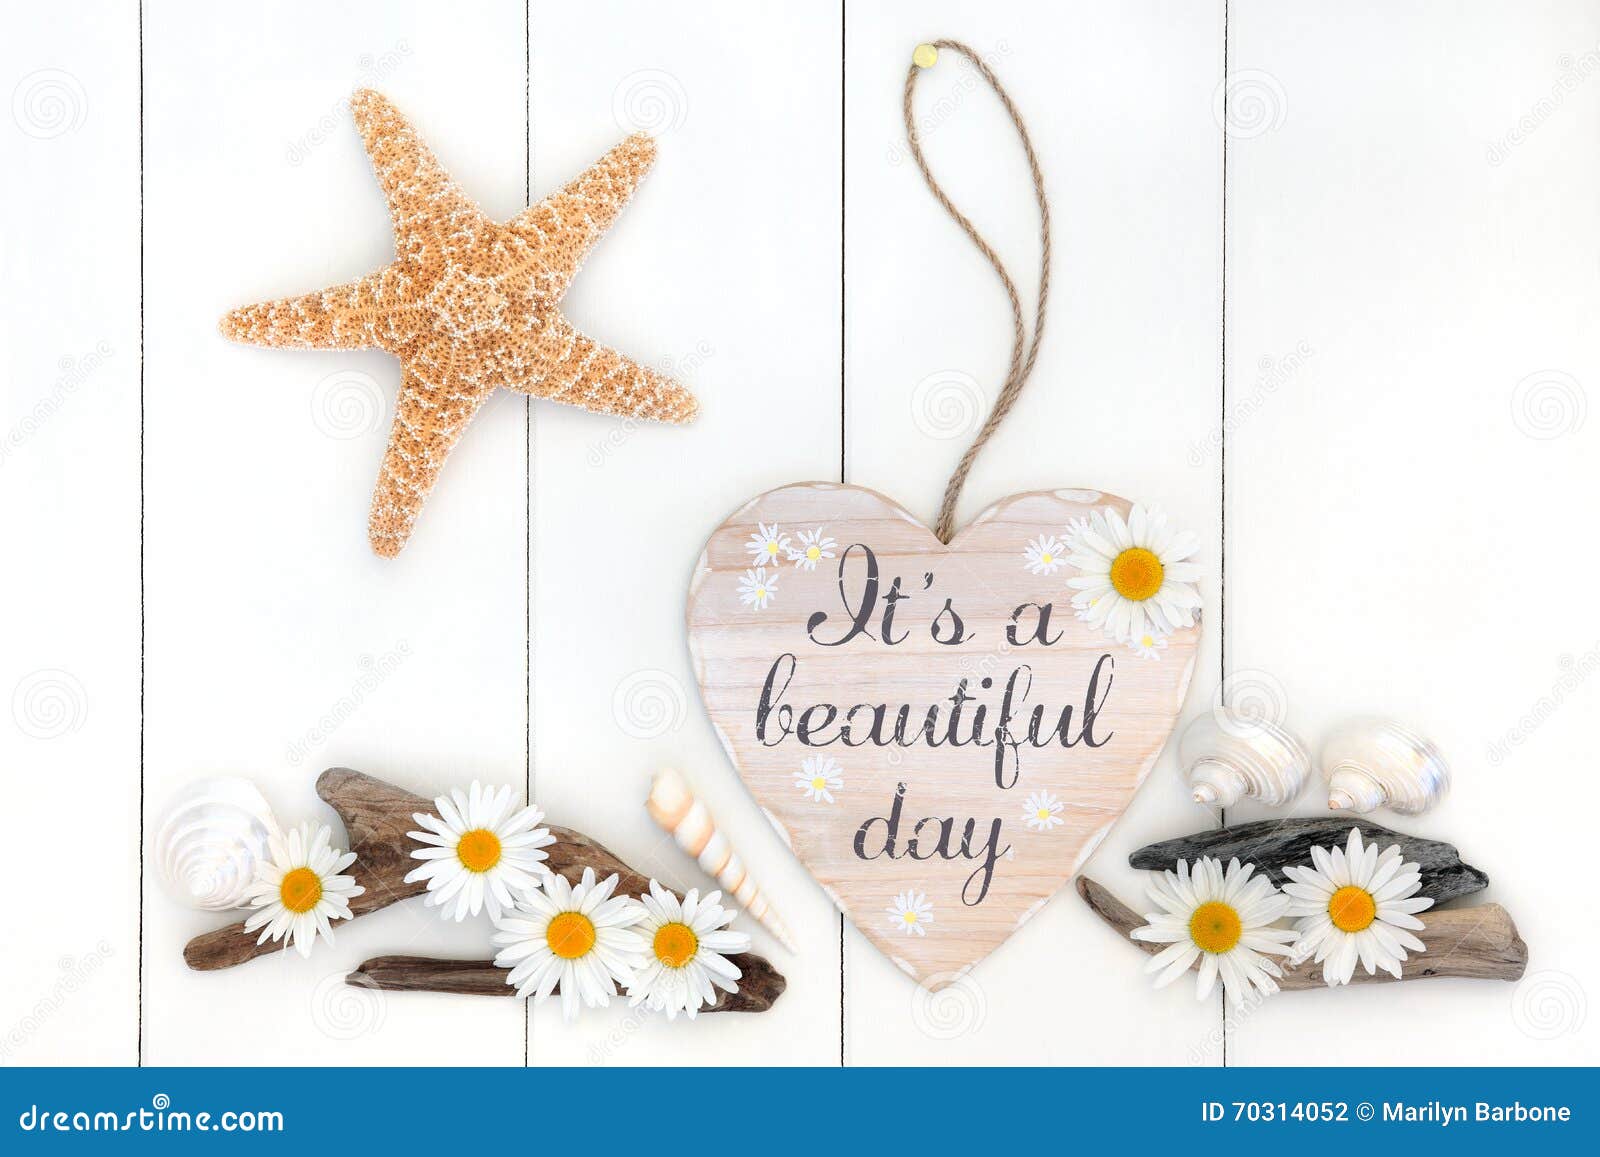 Its a Beautiful Day stock photo. Image of hanging, star - 70314052